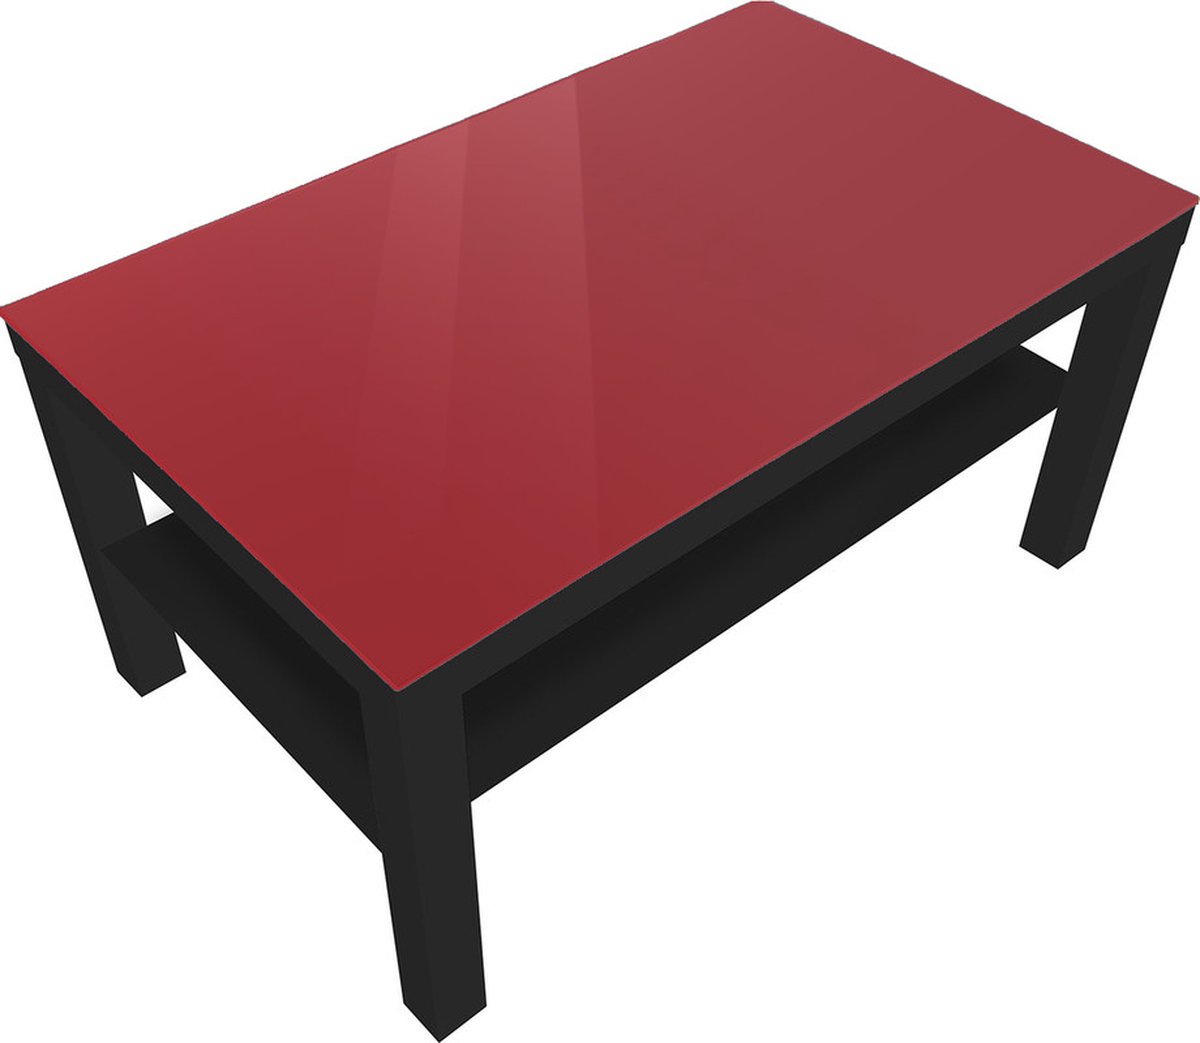 Table basse - Glas - Table d'appoint Salon - Table basse - Ikea Lack Base -  Rouge... | bol